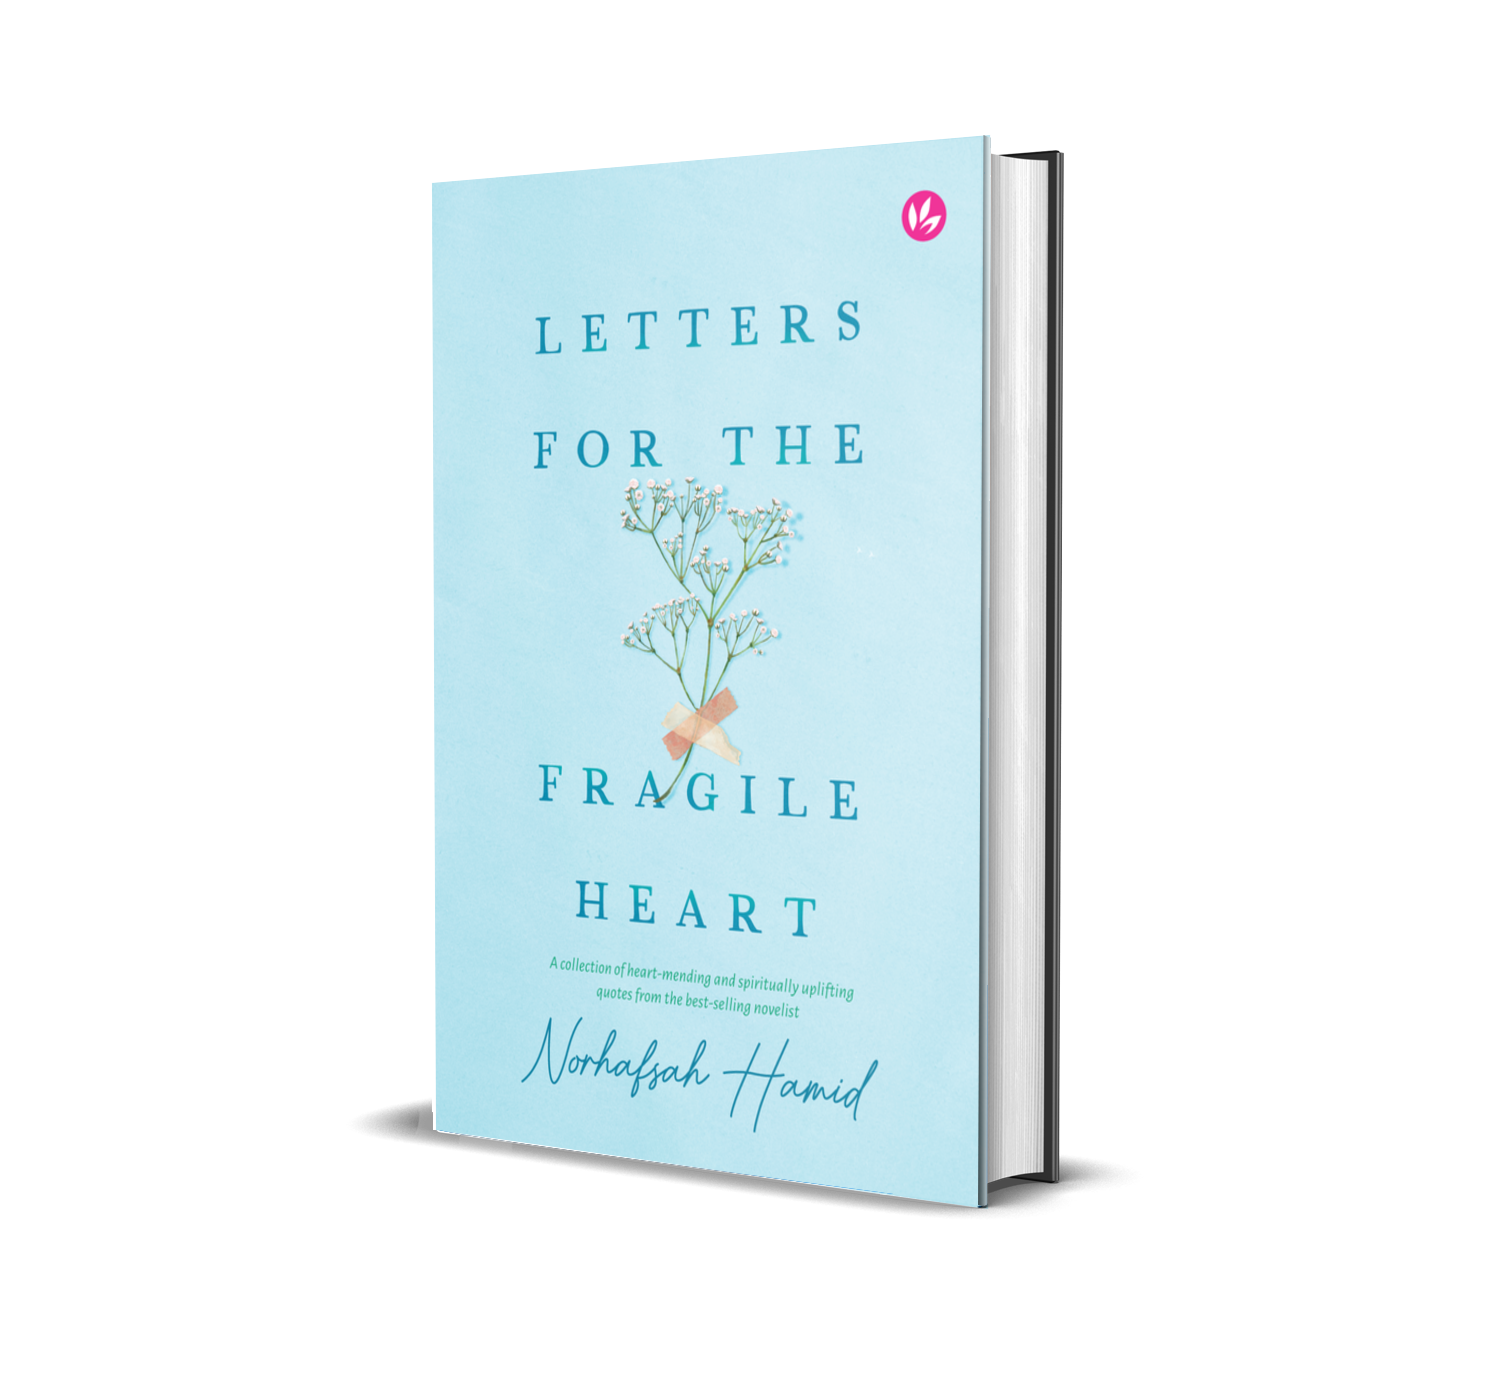 Iman Publication Book Letters For the Fragile Heart (Hardcover) by Norhafsah Hamid 201605